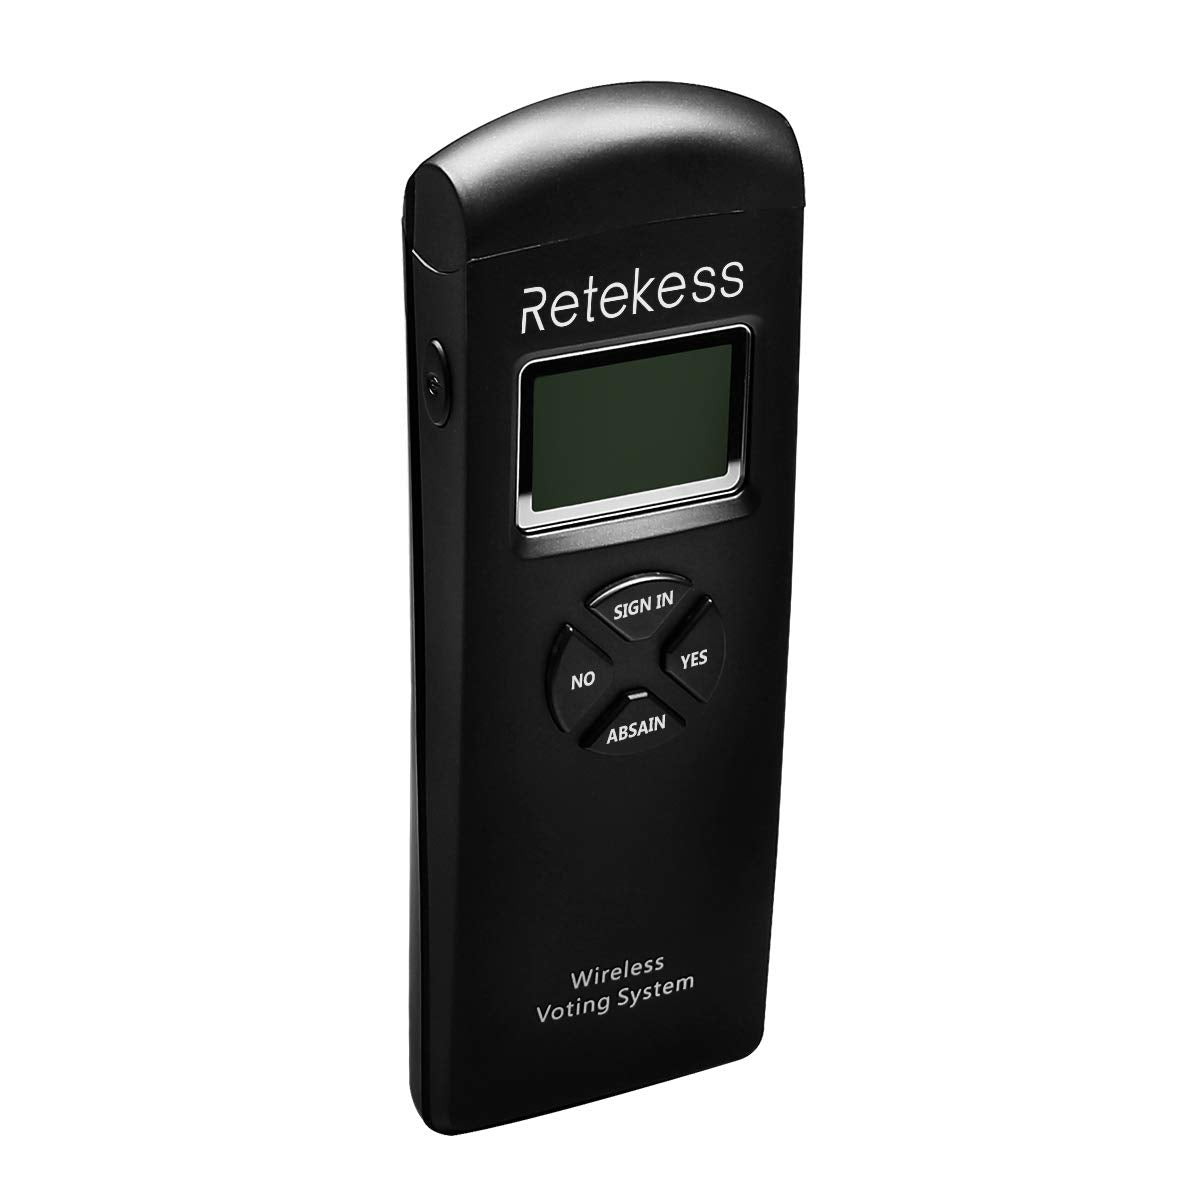 Retekess Wireless Conference Voting System Support 24 Channels 1 T146 Main Control Base Station and 10 T147 Wireless Voting Devices